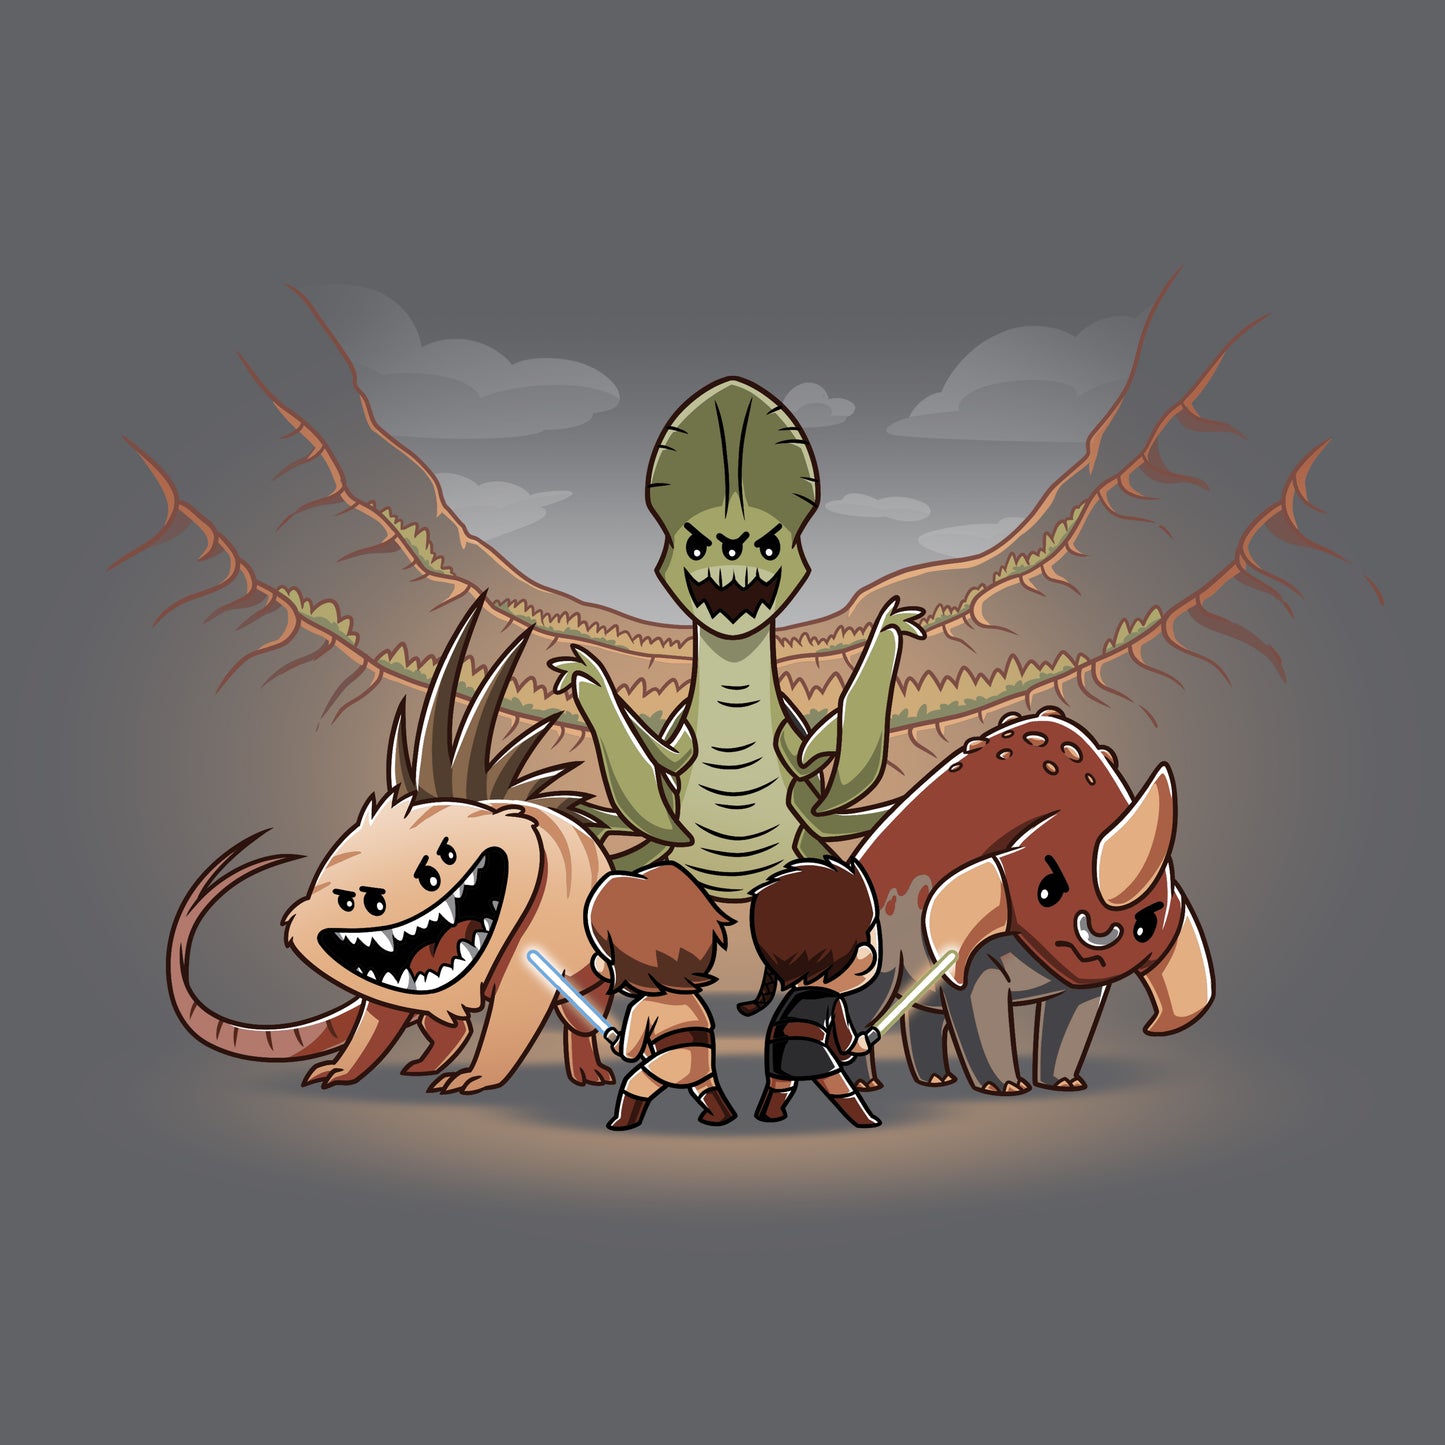 An officially licensed Star Wars T-shirt featuring a group of people and a dinosaur, made from ringspun cotton, called "Geonosis Arena Duel".